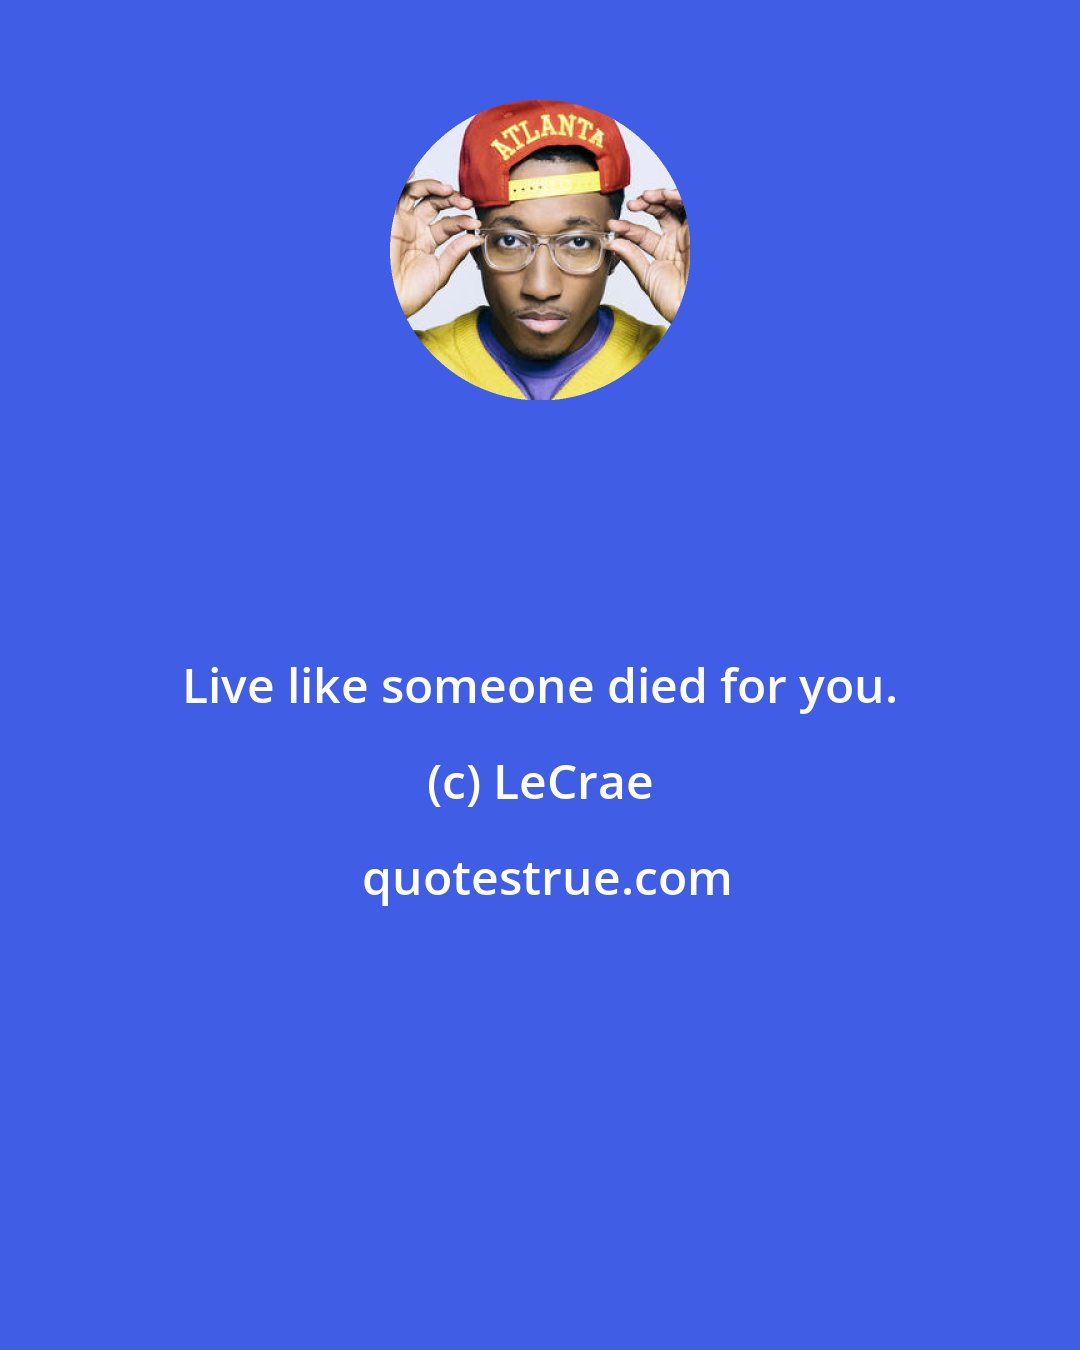 LeCrae: Live like someone died for you.